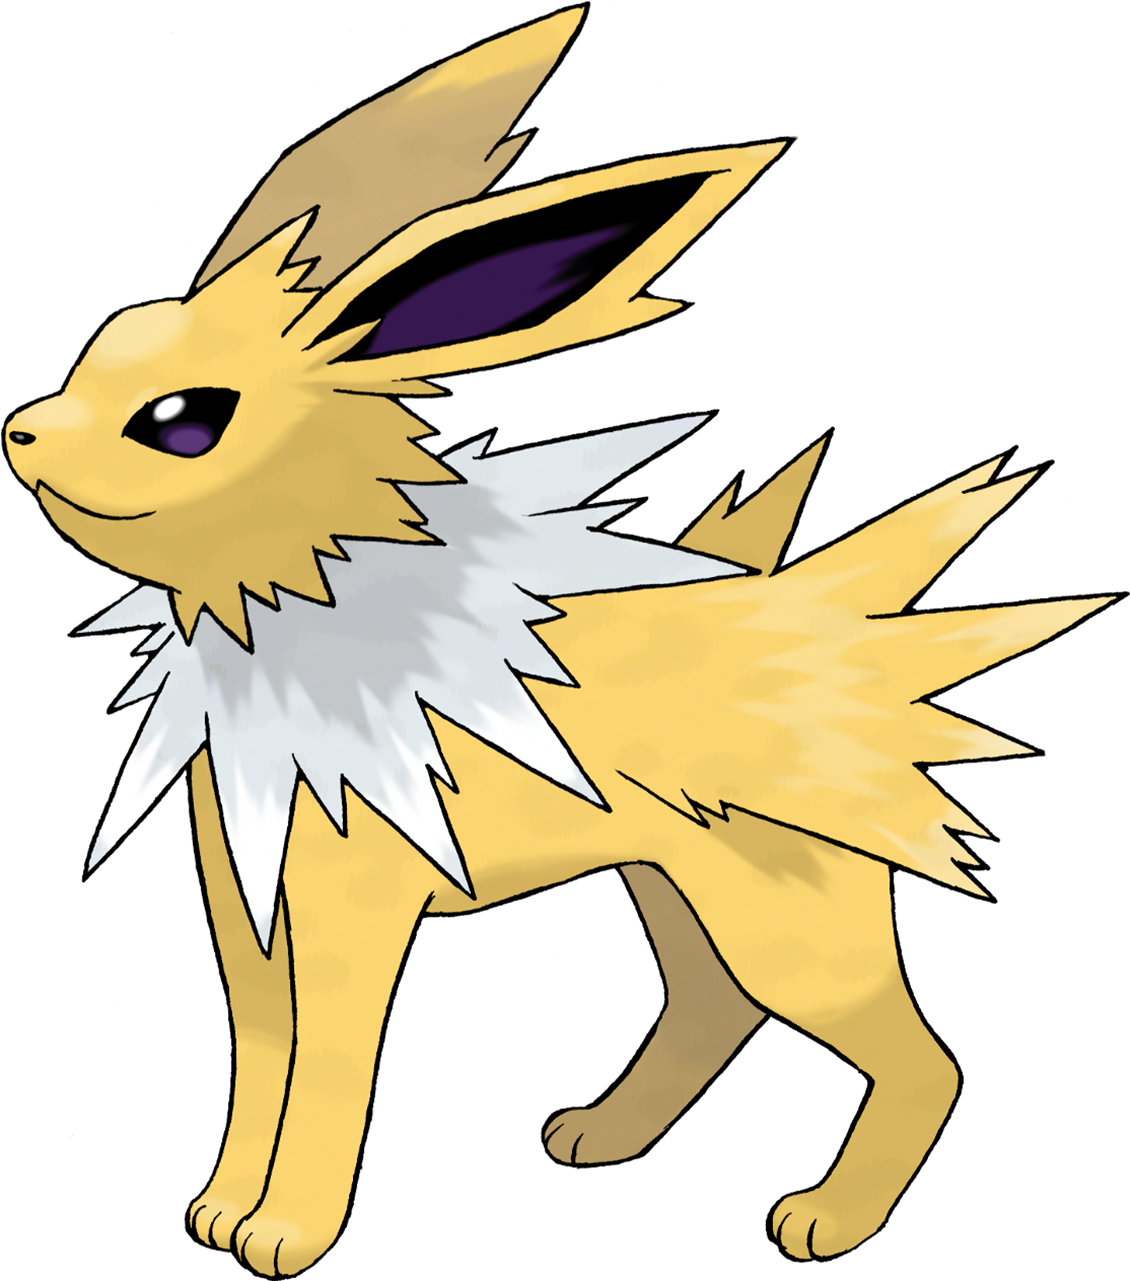 A Schuyler Sister And Therefore An Eeveelution - Pokemon Jolteon (1200x1200)